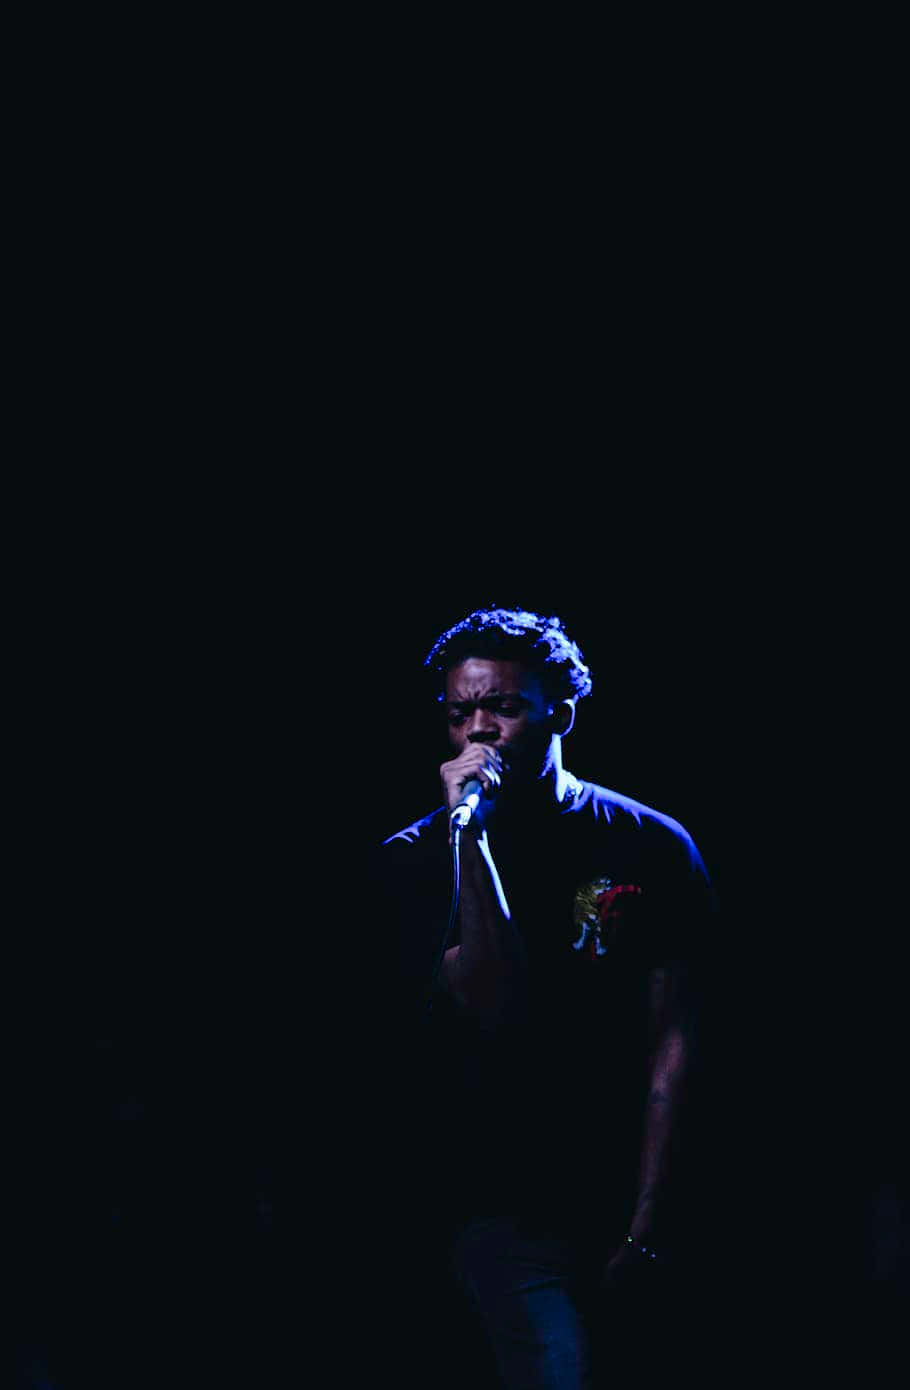 A Man Singing Into A Microphone In The Dark Background